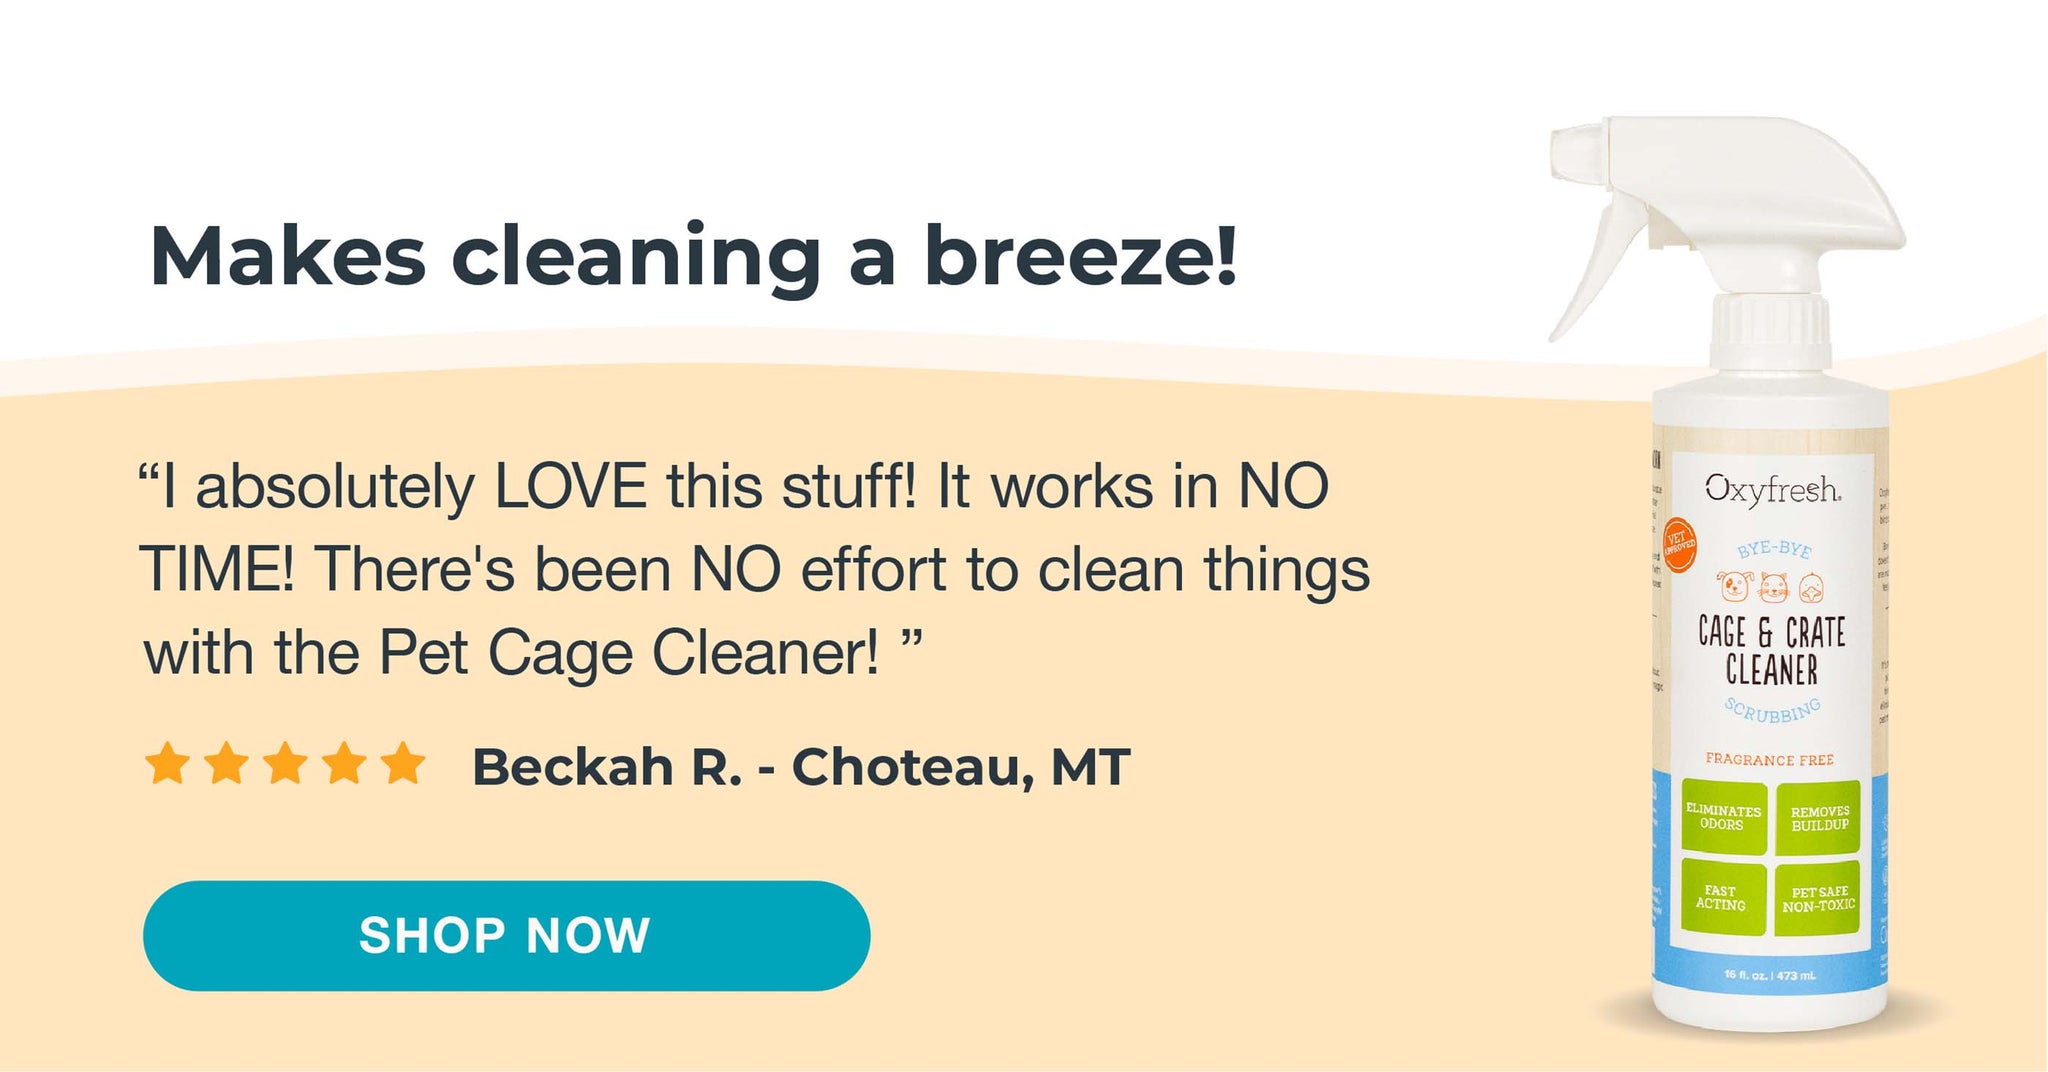 cage & crate cleaner